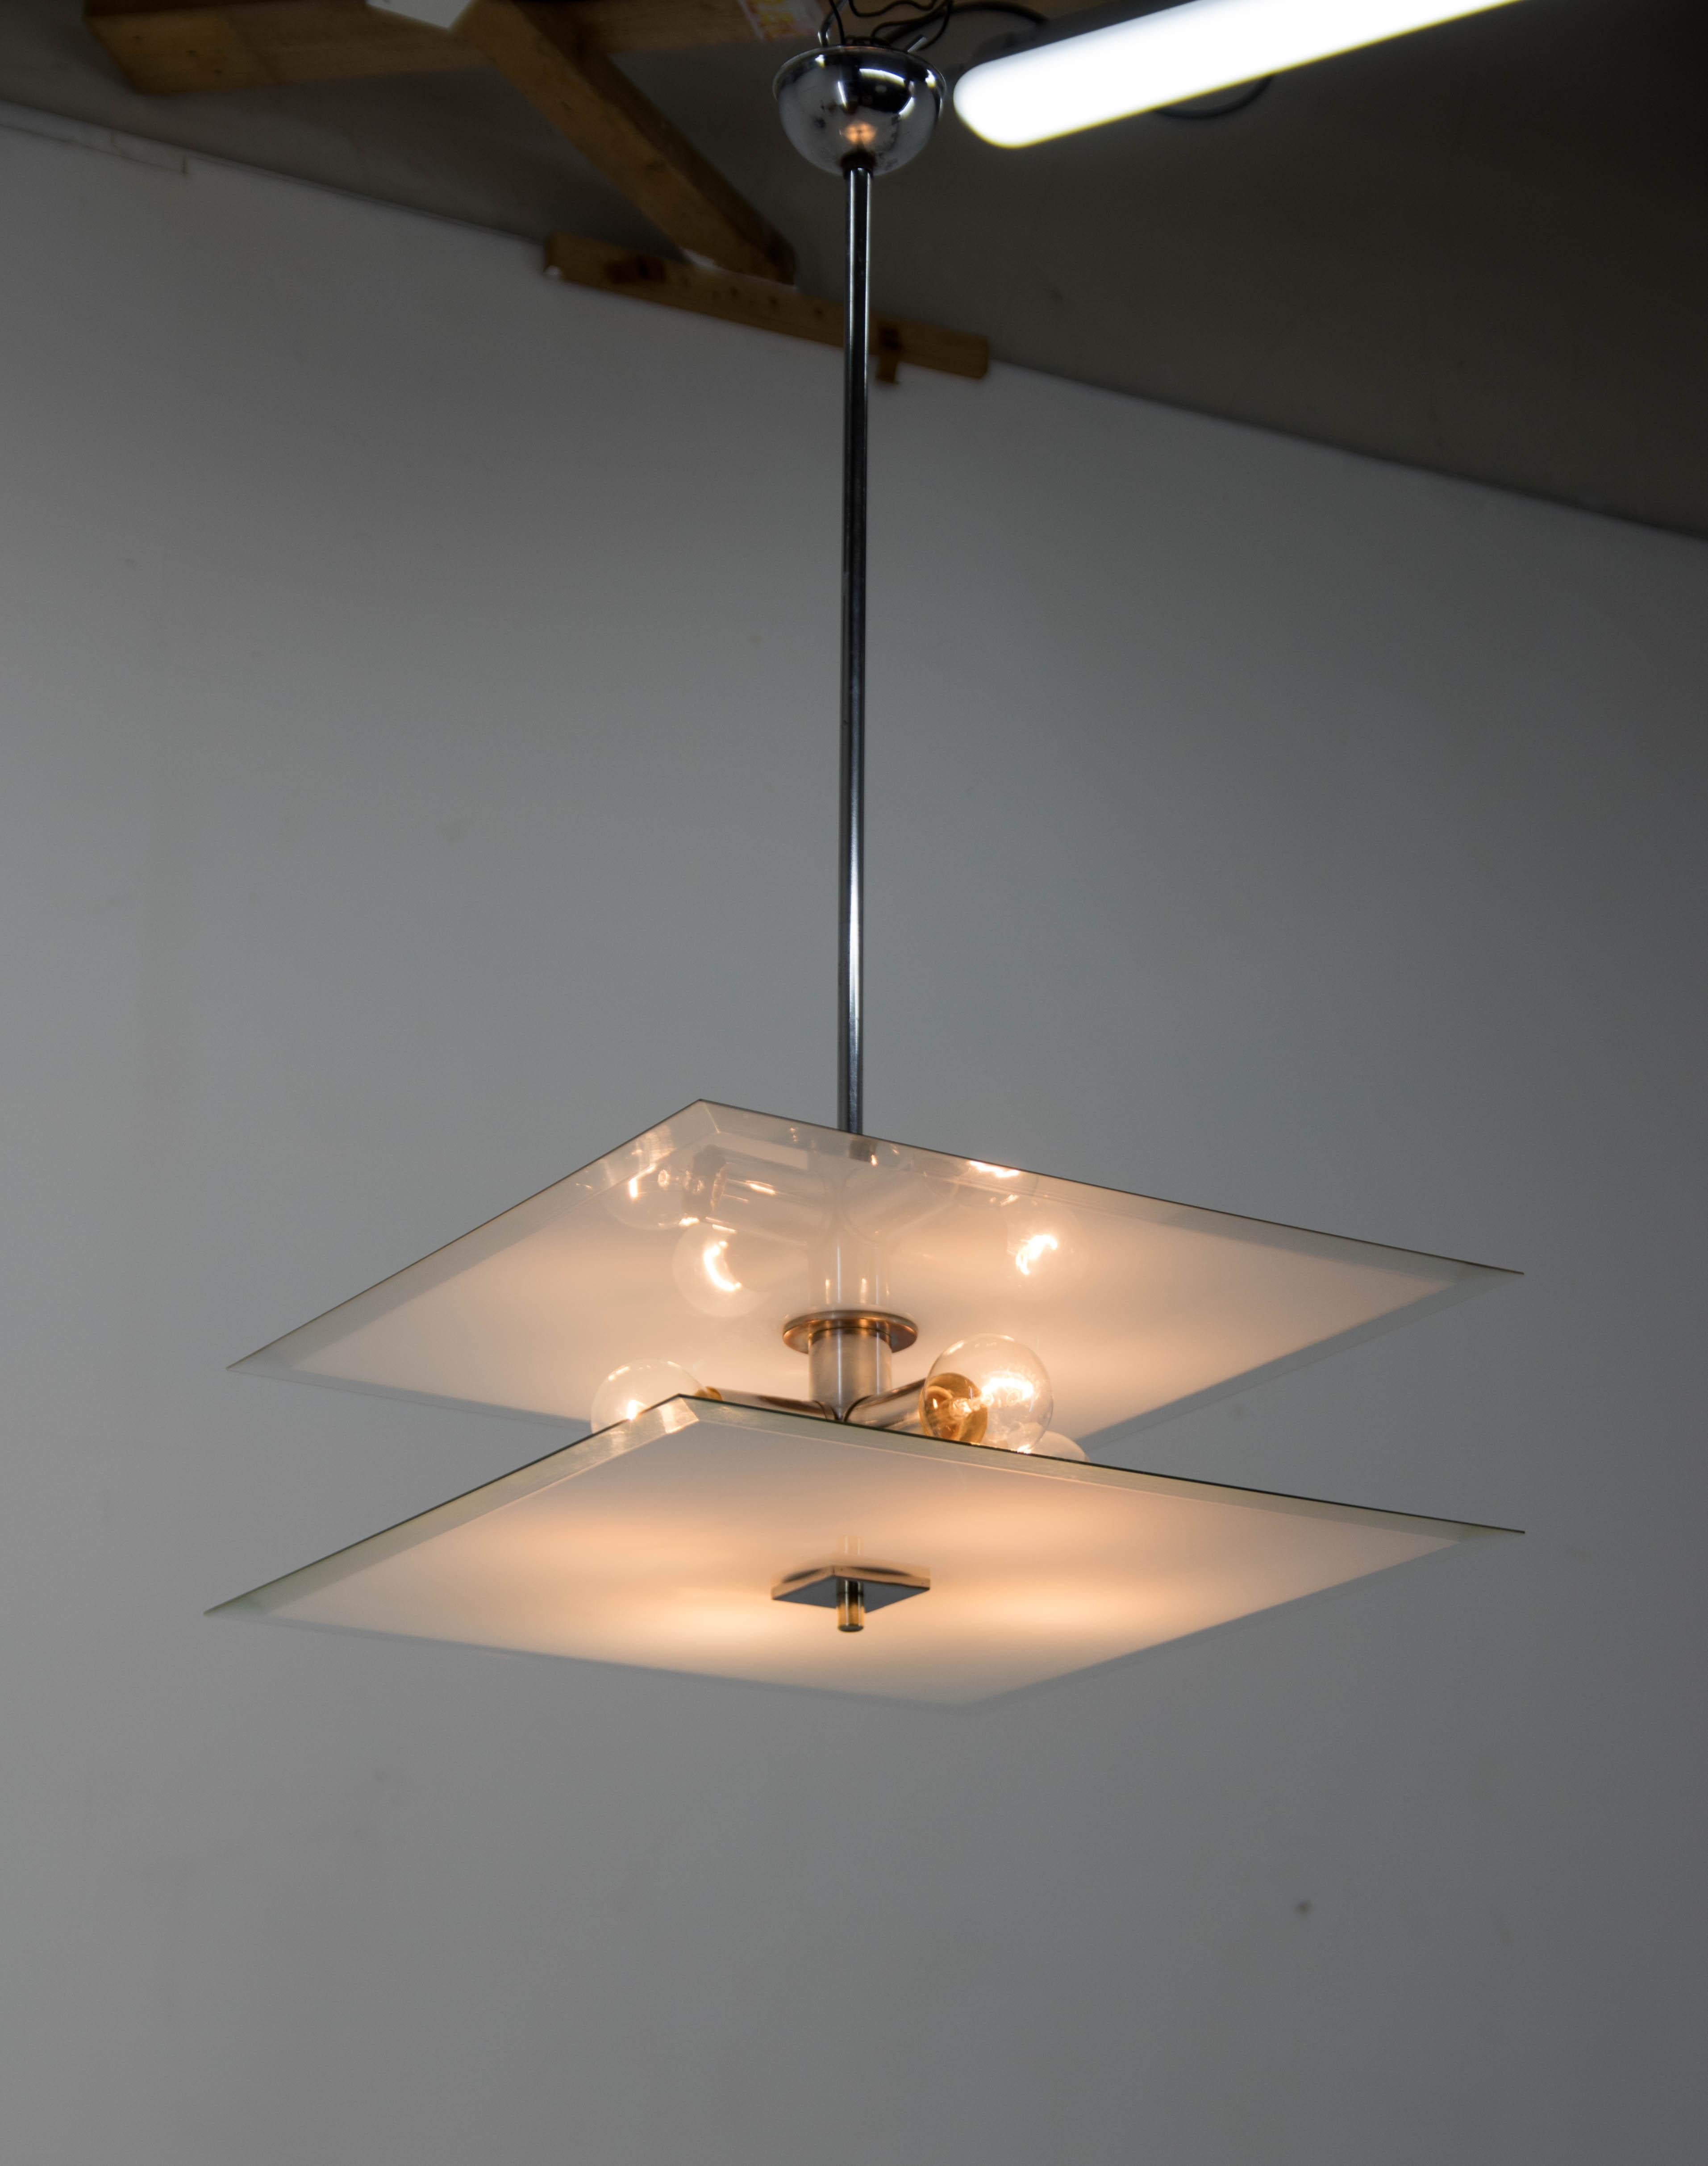 Elegant and simple Bauhaus chandelier.
Made of chrome and two-layer glass.
Very good original condition.
Glass without any damage.
Rewired: two separate circuits - 2+2x40W, E25-E27 bulbs
US wiring compatible.